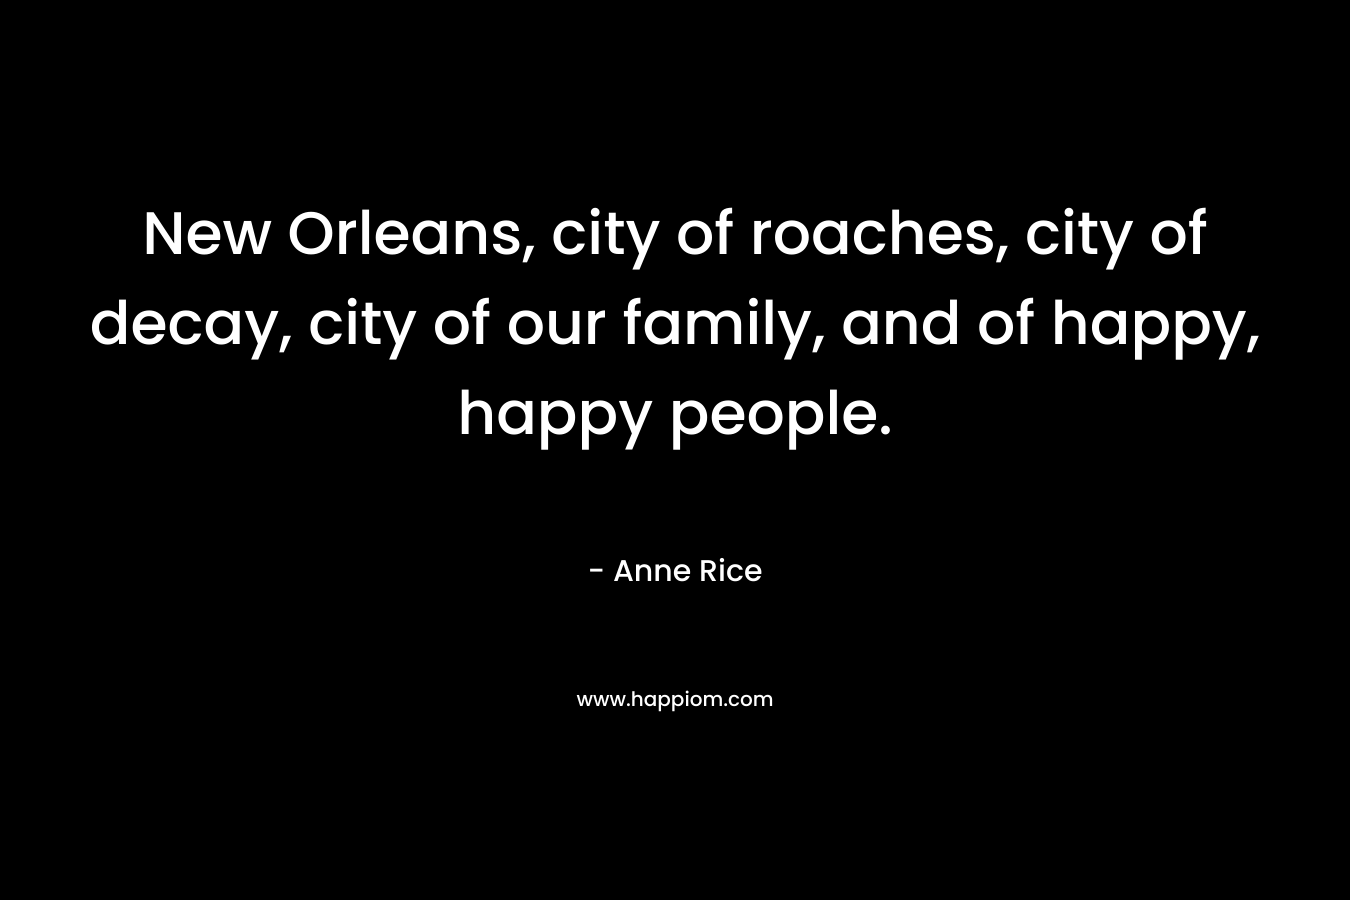 New Orleans, city of roaches, city of decay, city of our family, and of happy, happy people.